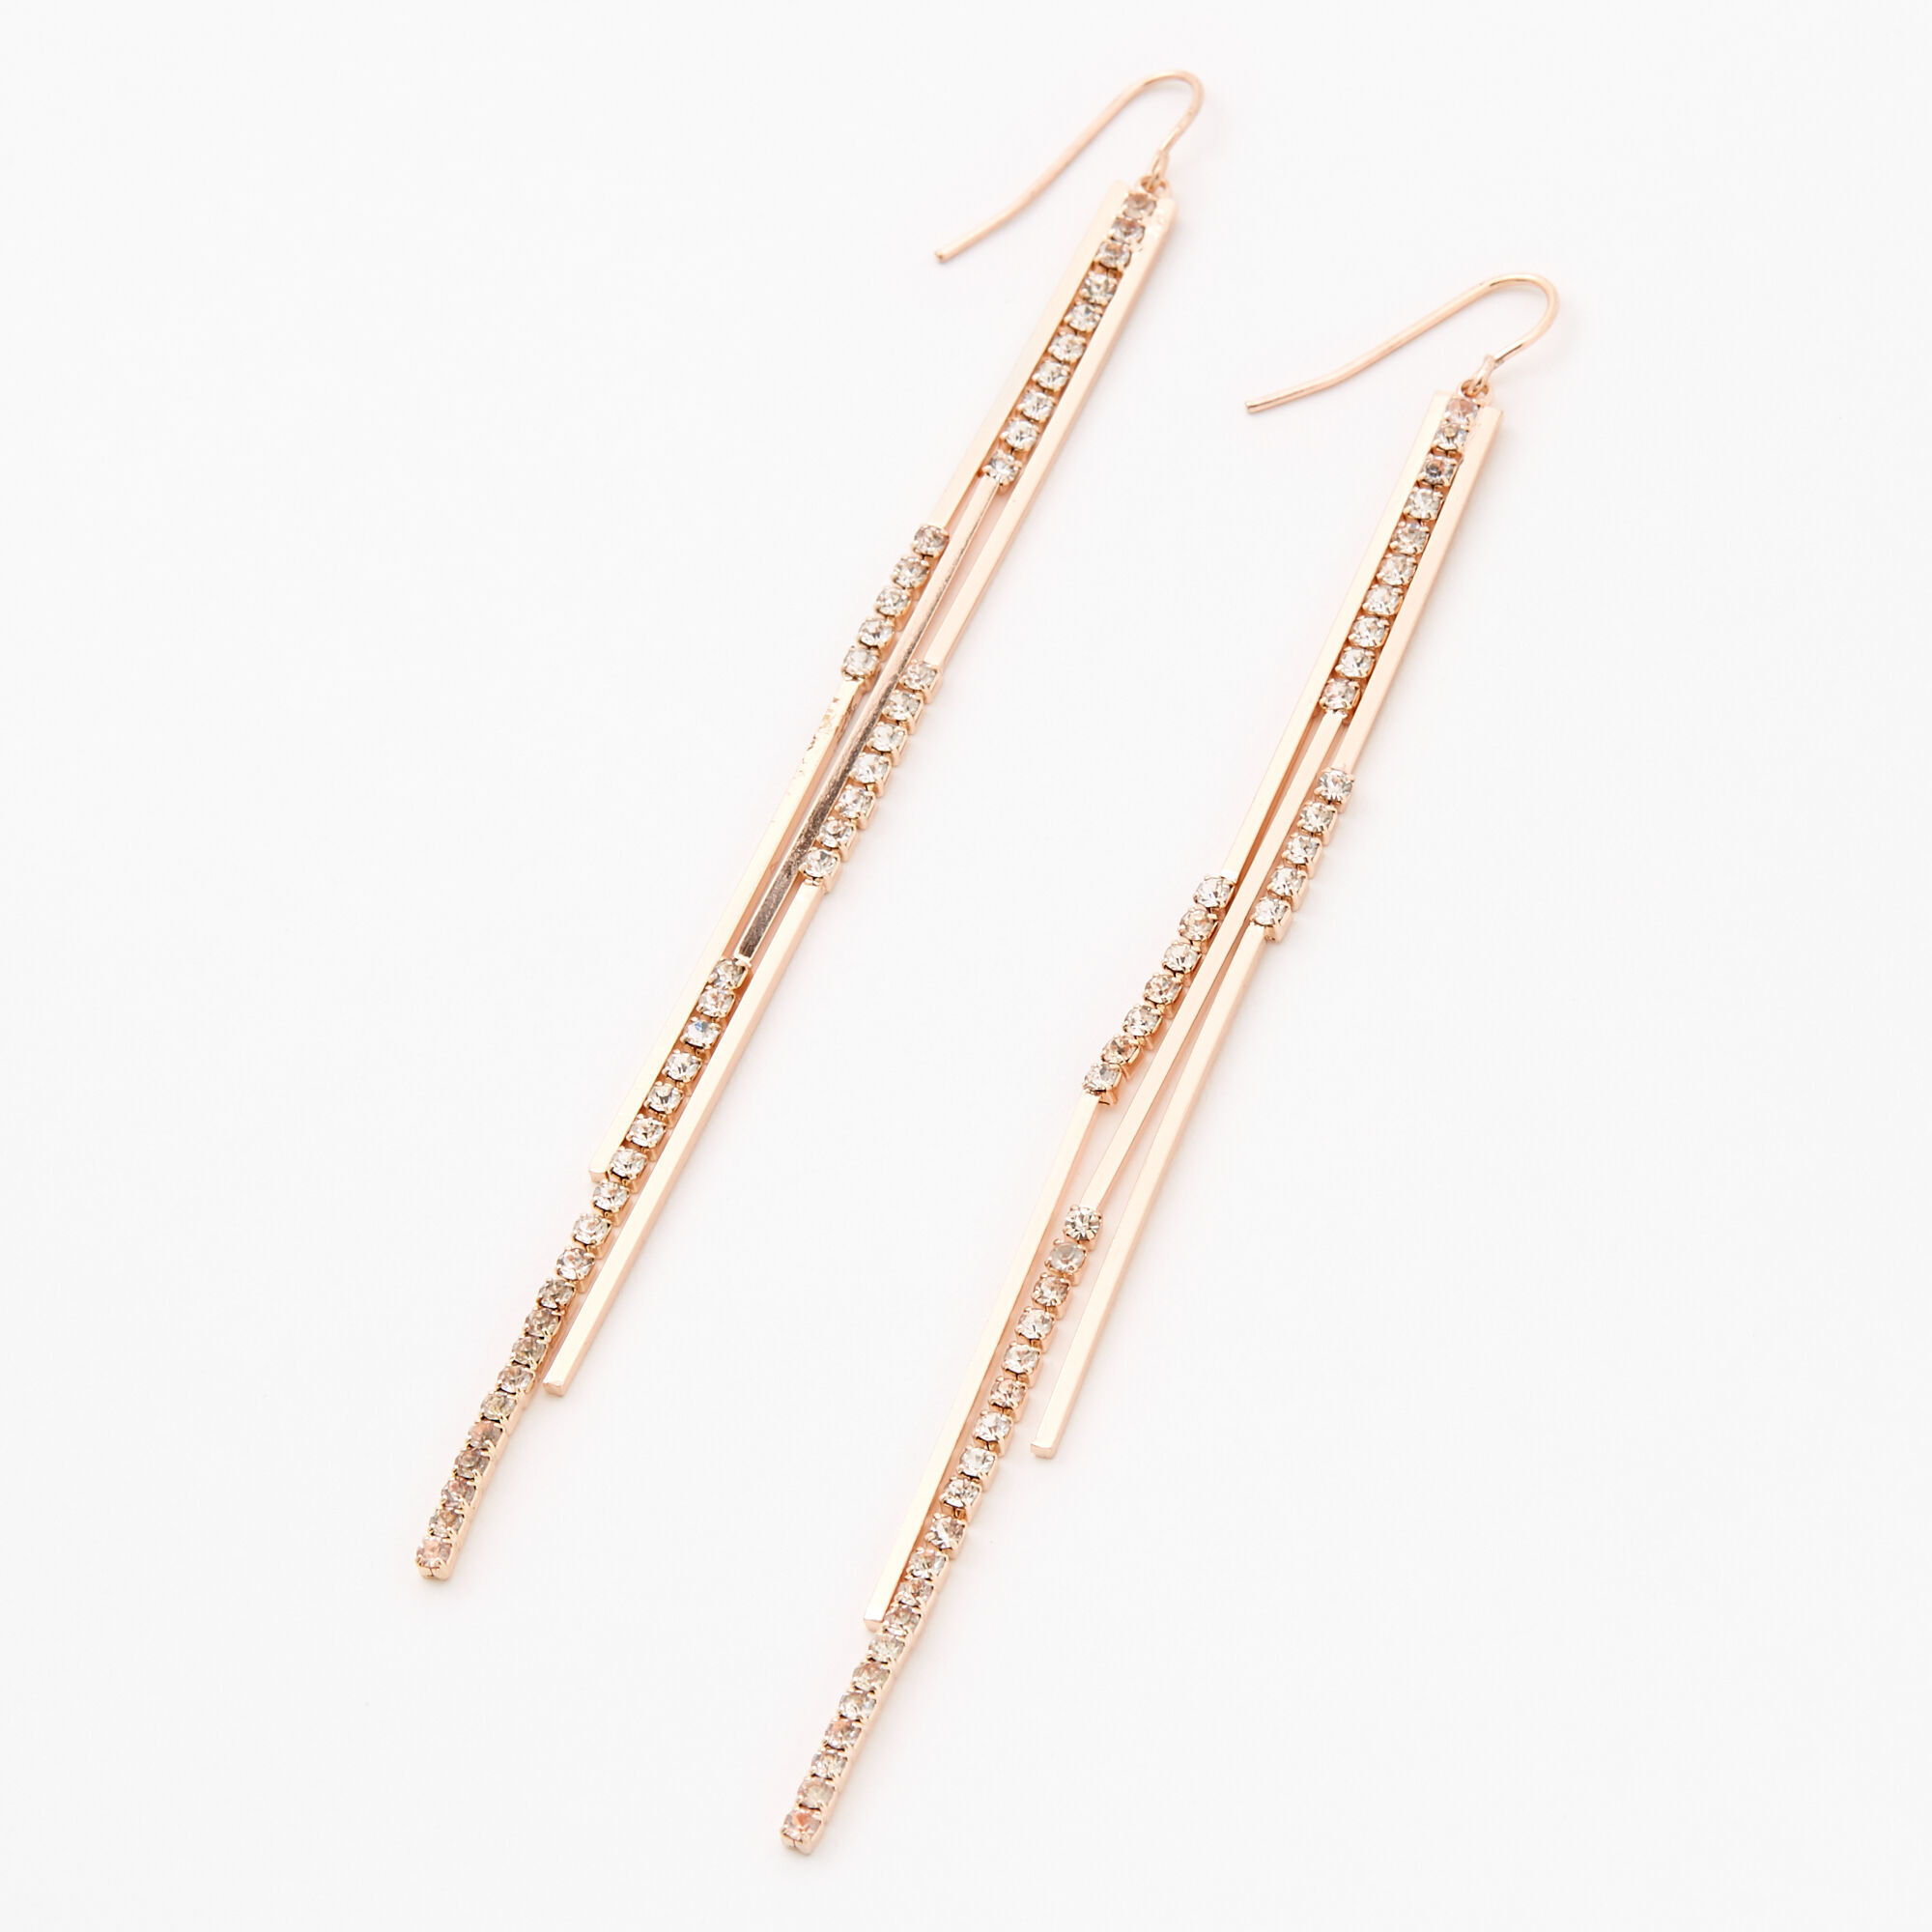 View Claires Rose Rhinestone 4 Linear Stick Drop Earrings Gold information